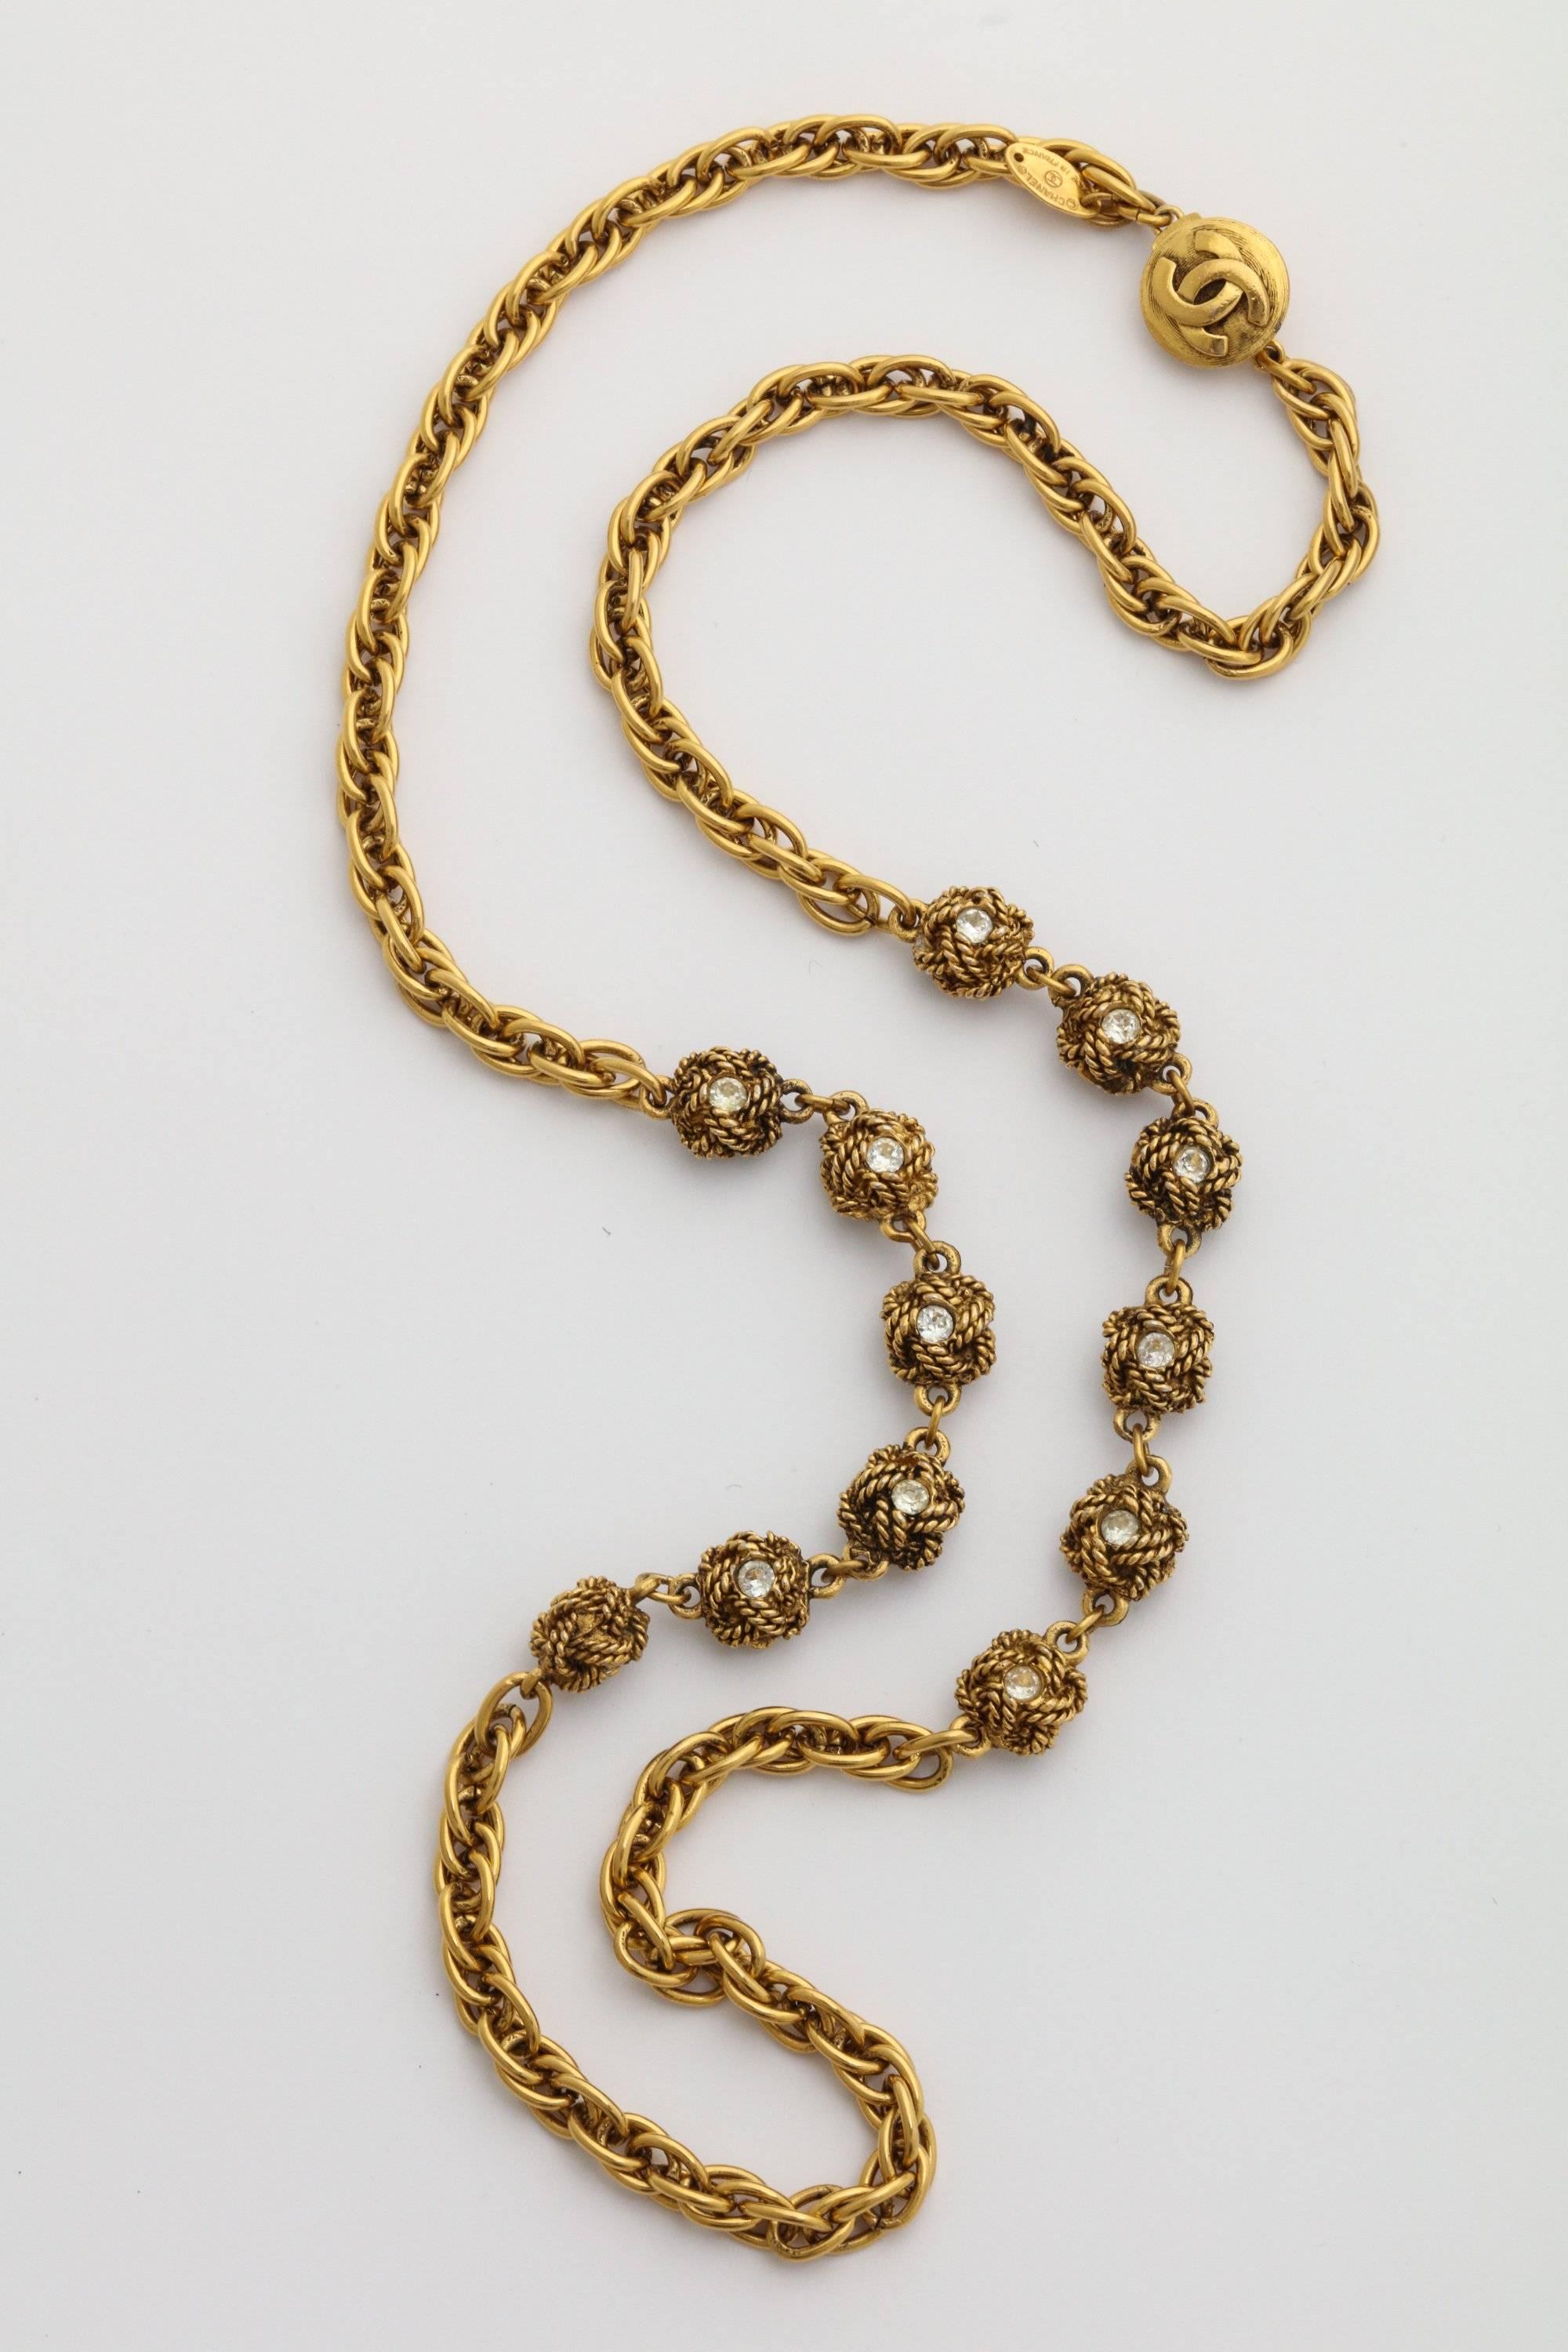 A wonderful long Chanel necklace with embedded crystals in gold nuggets